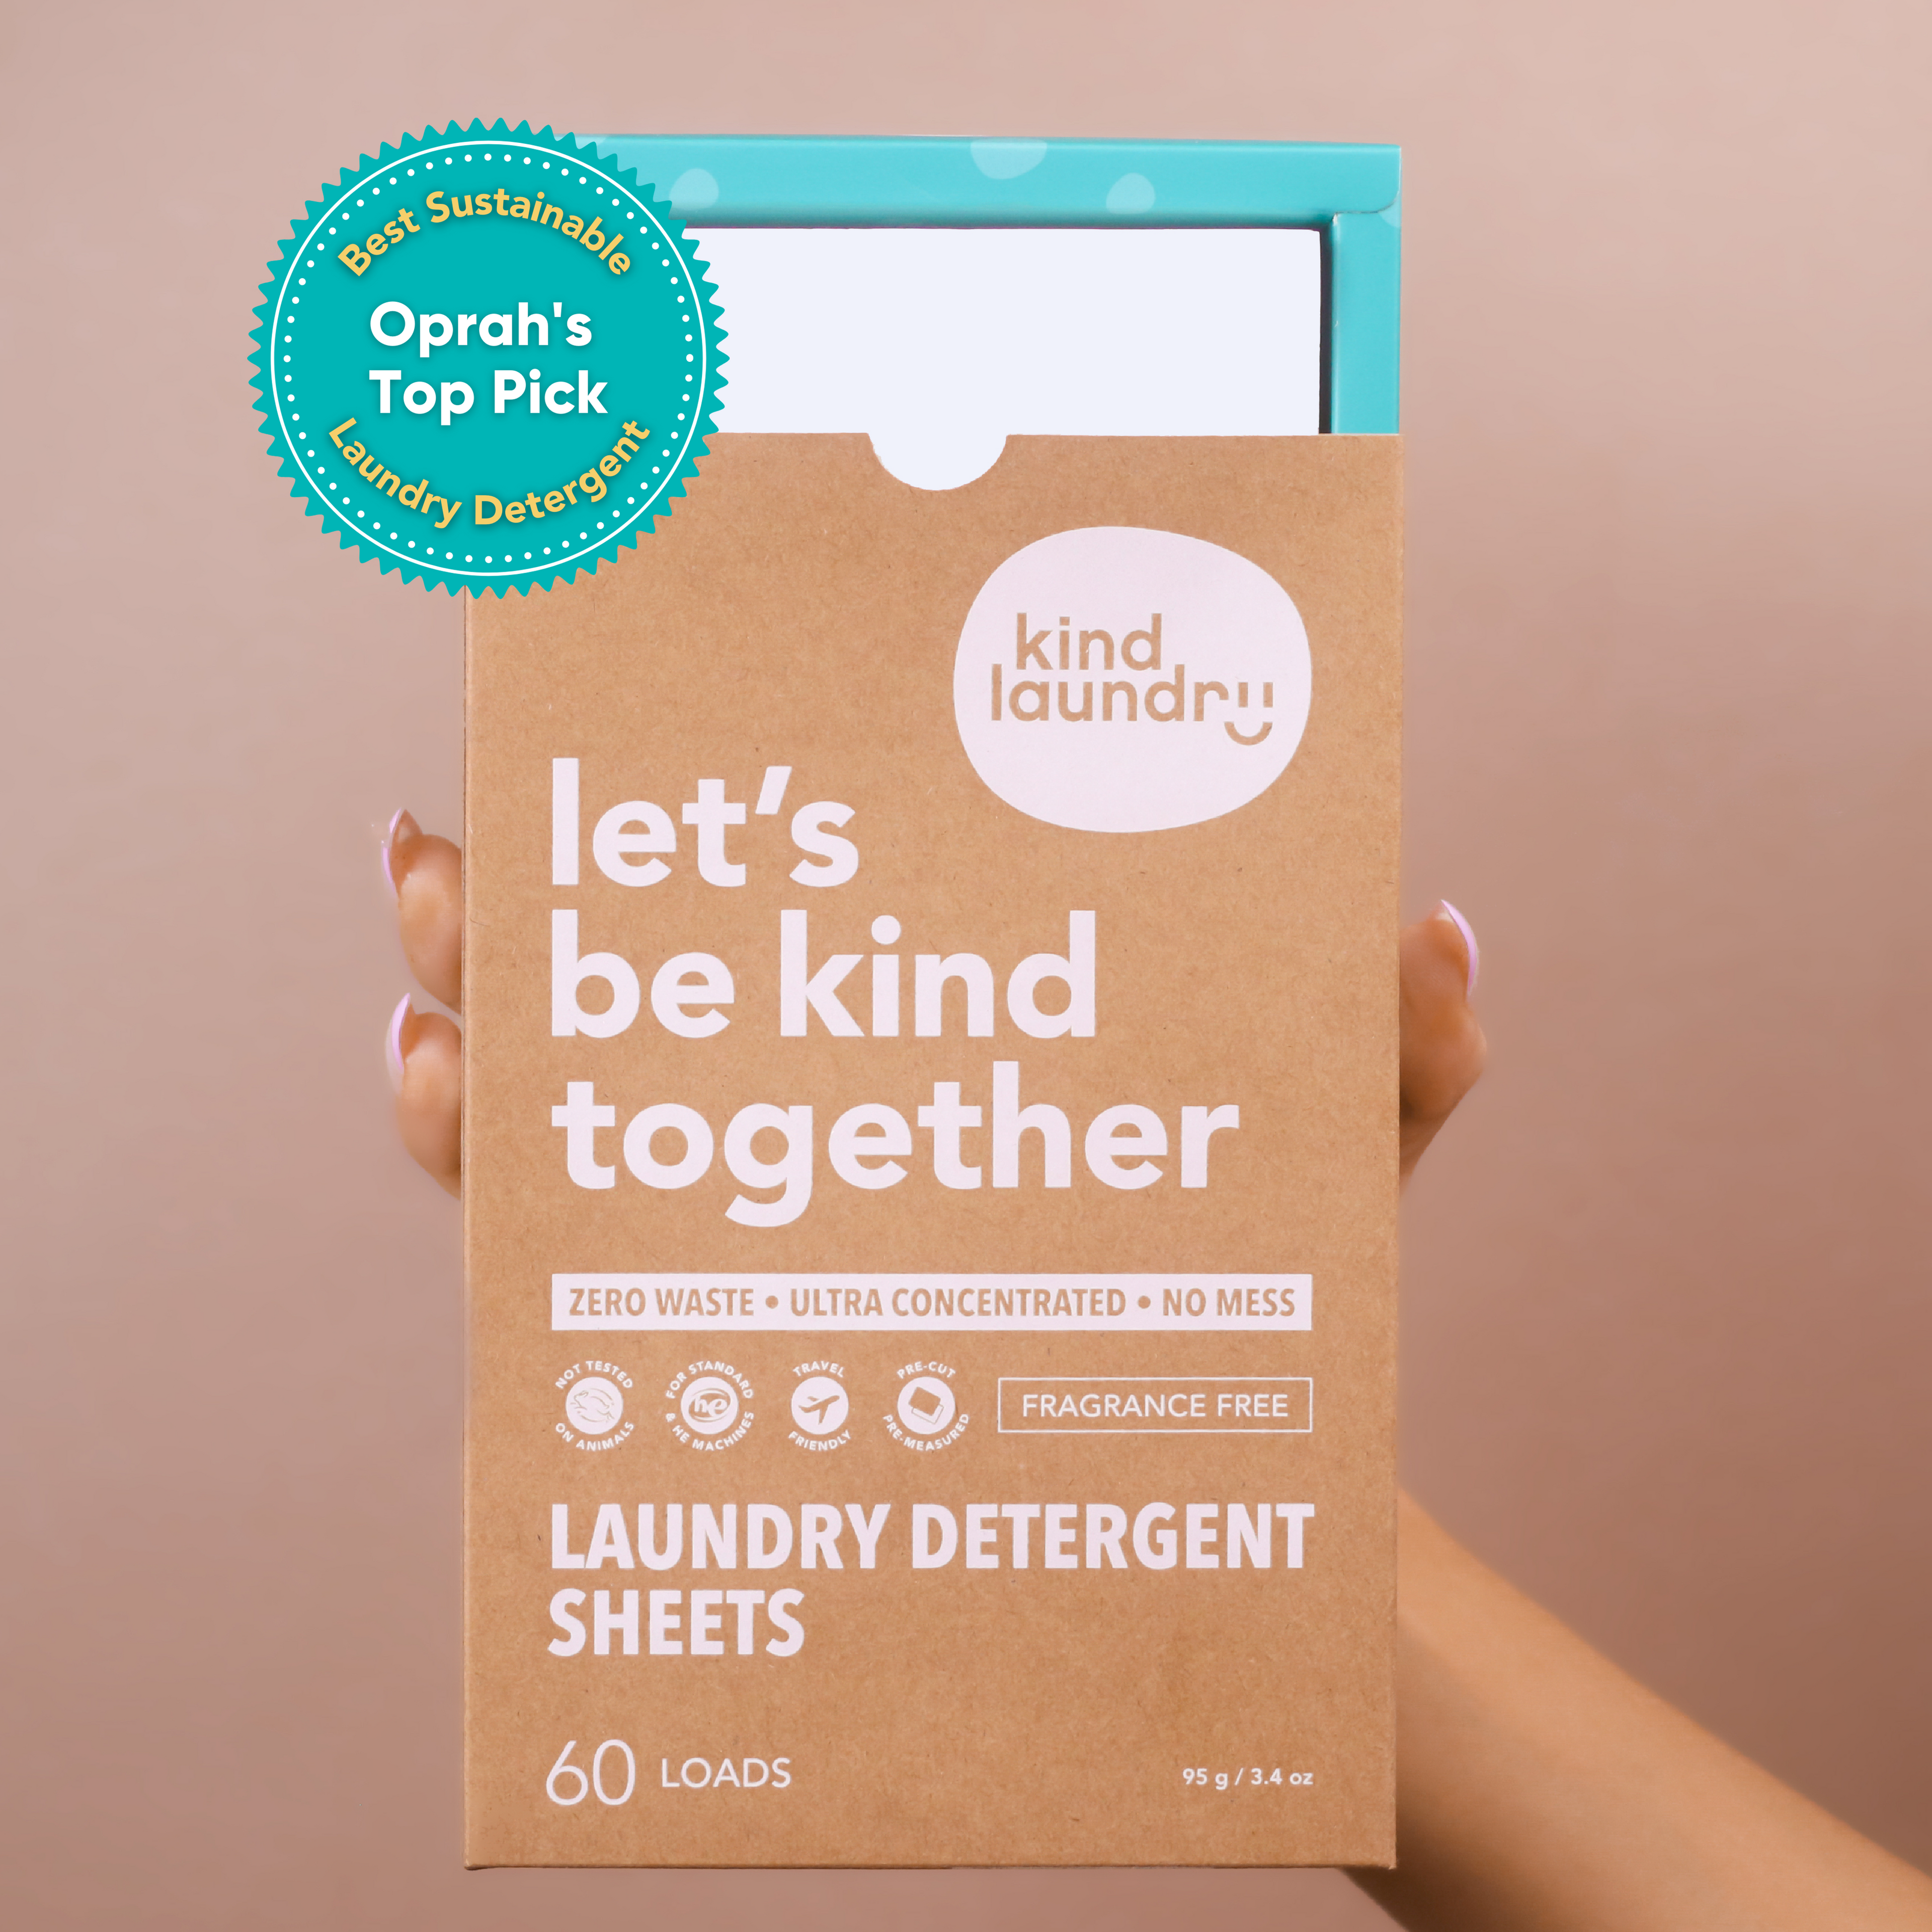 Eco-Friendly Laundry Detergent Sheets (60 loads)